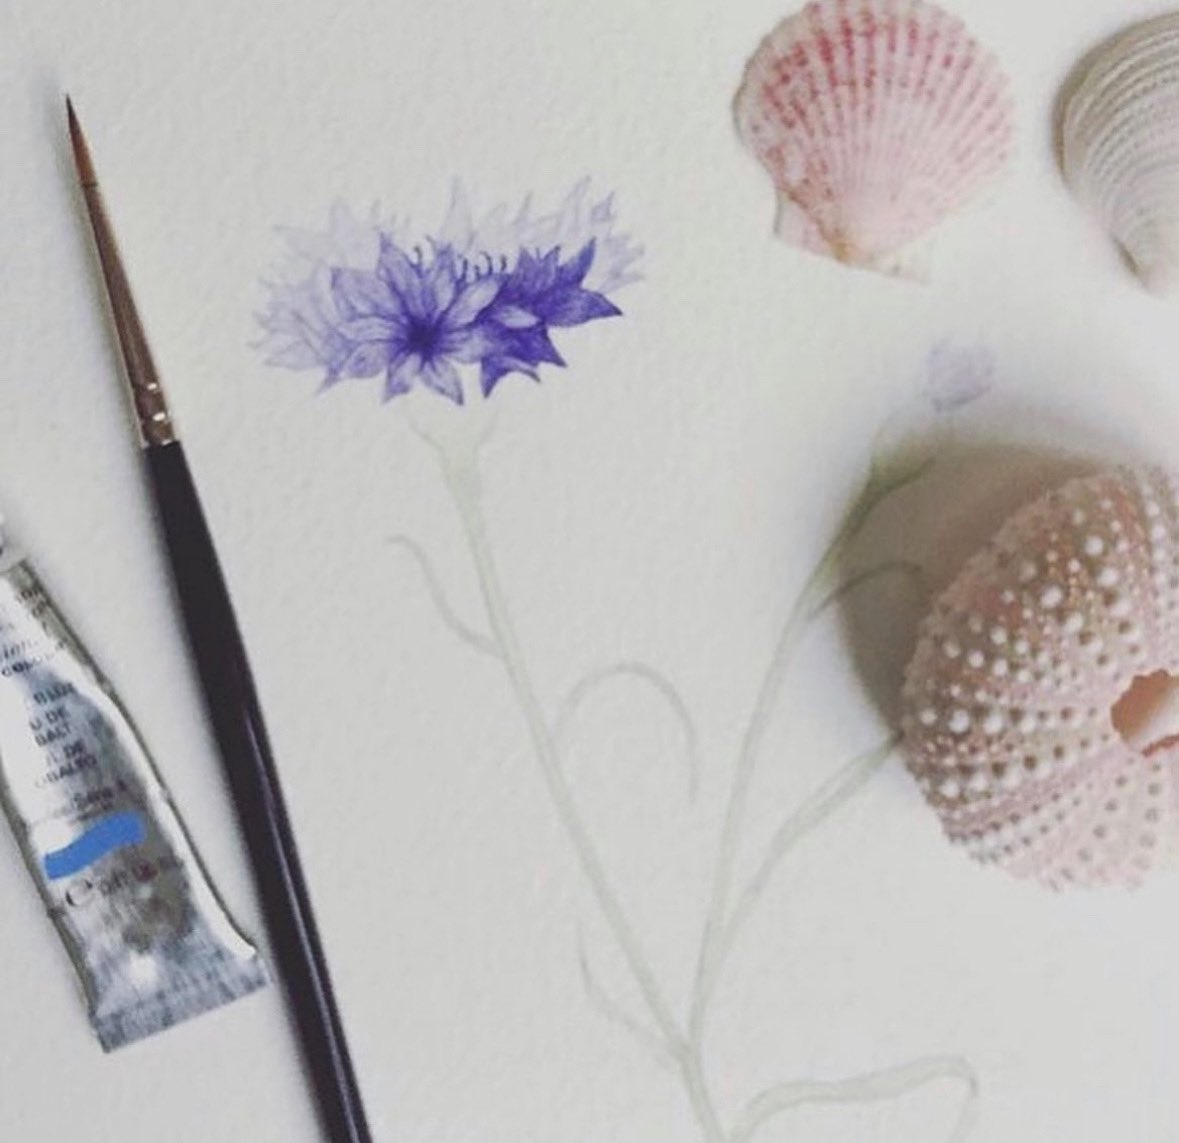 A watercolour cornflower and some shells to cheer up a damp Wednesday.